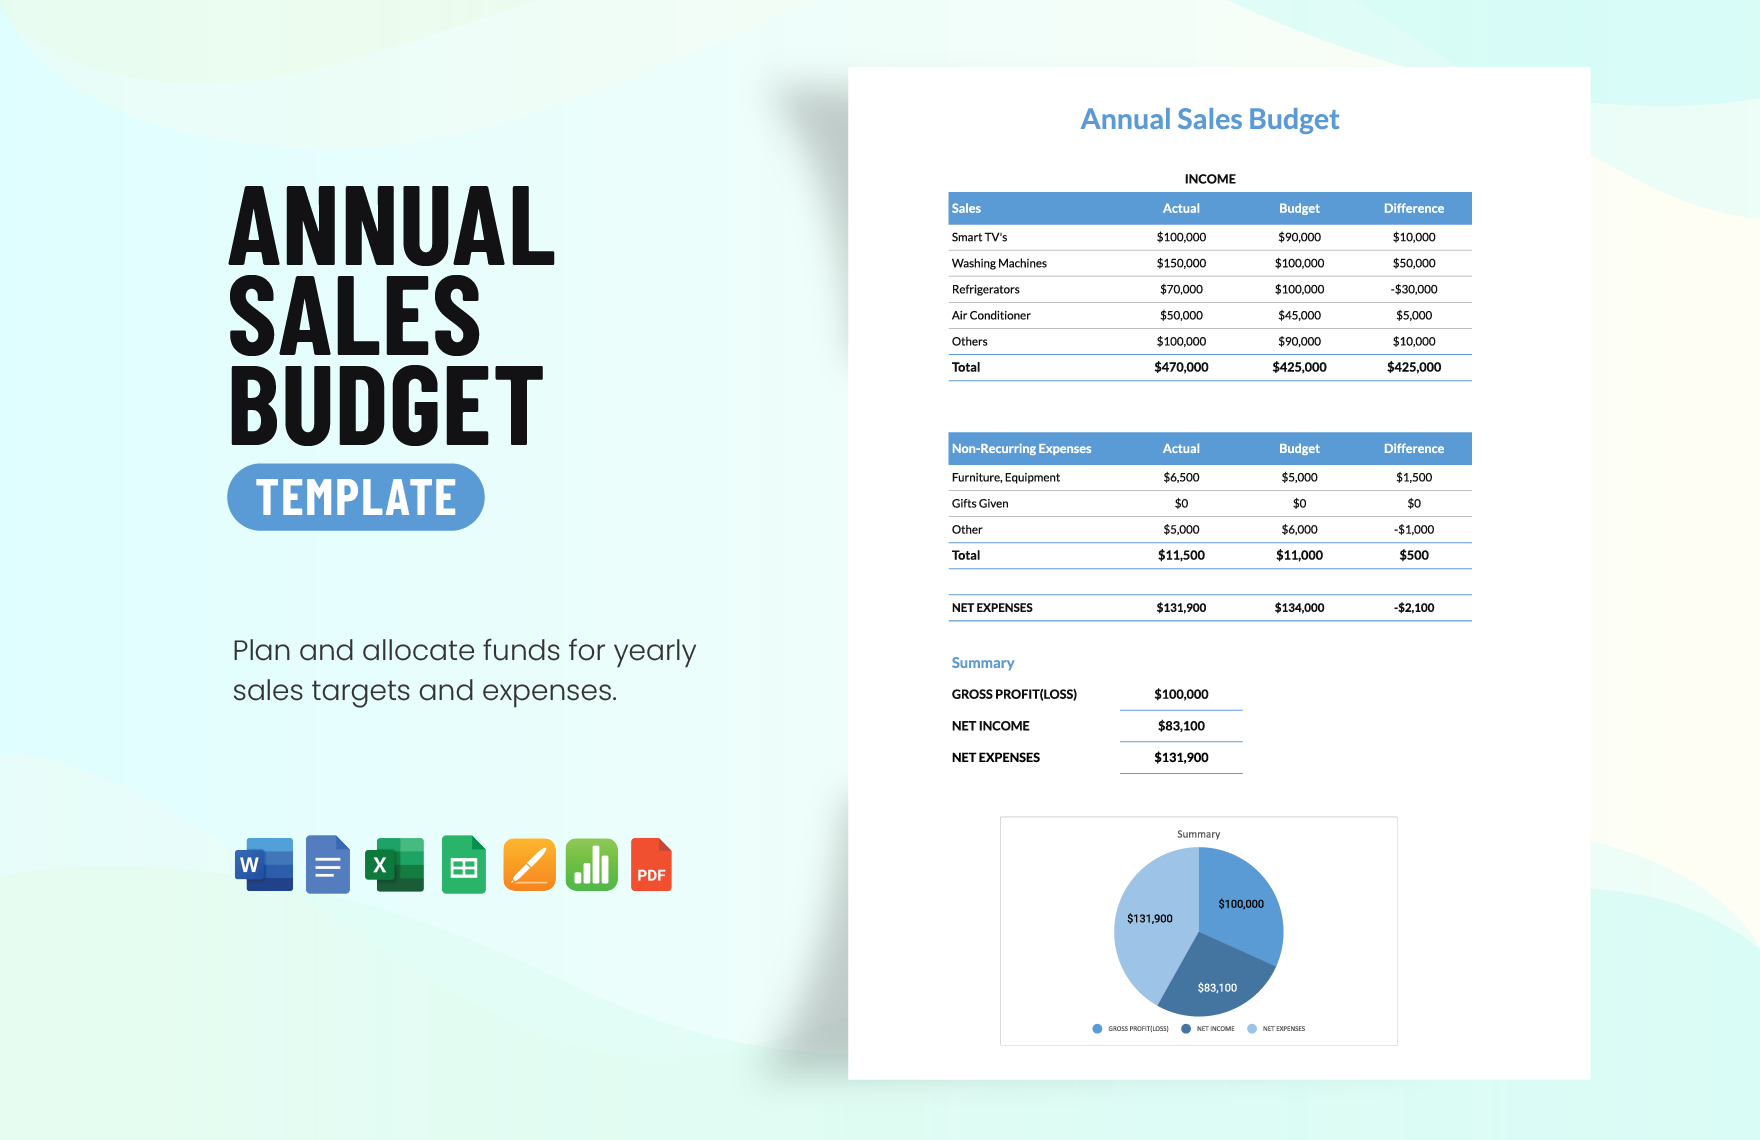 Annual Sales Budget Template